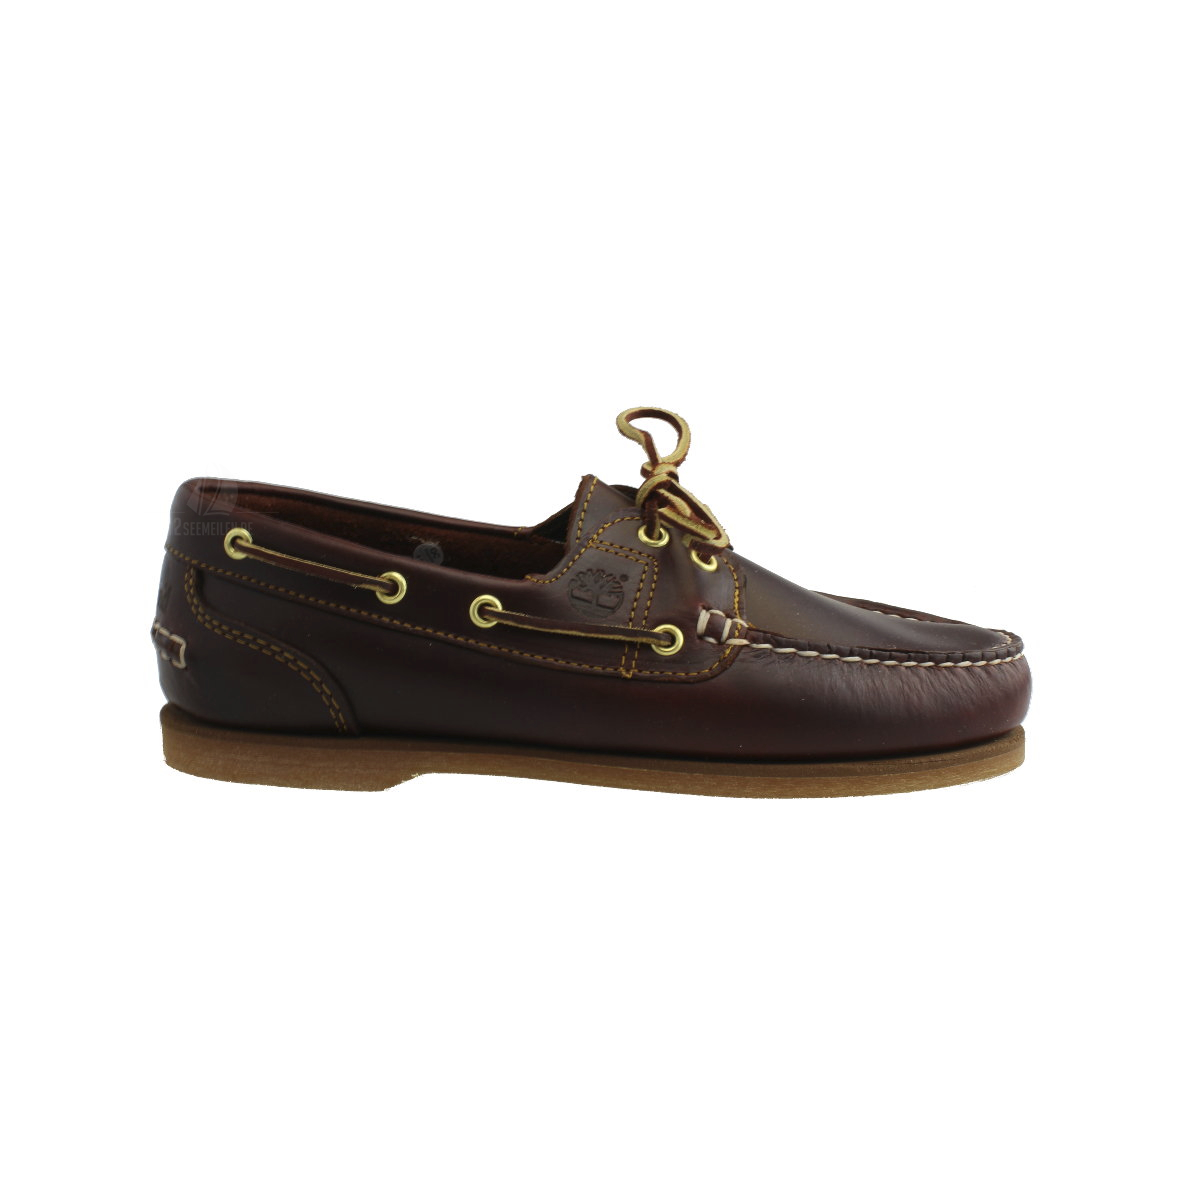 Timberland Classic Boat Amherst bootschoen dames rootbeer eu 37 ( us 6 )